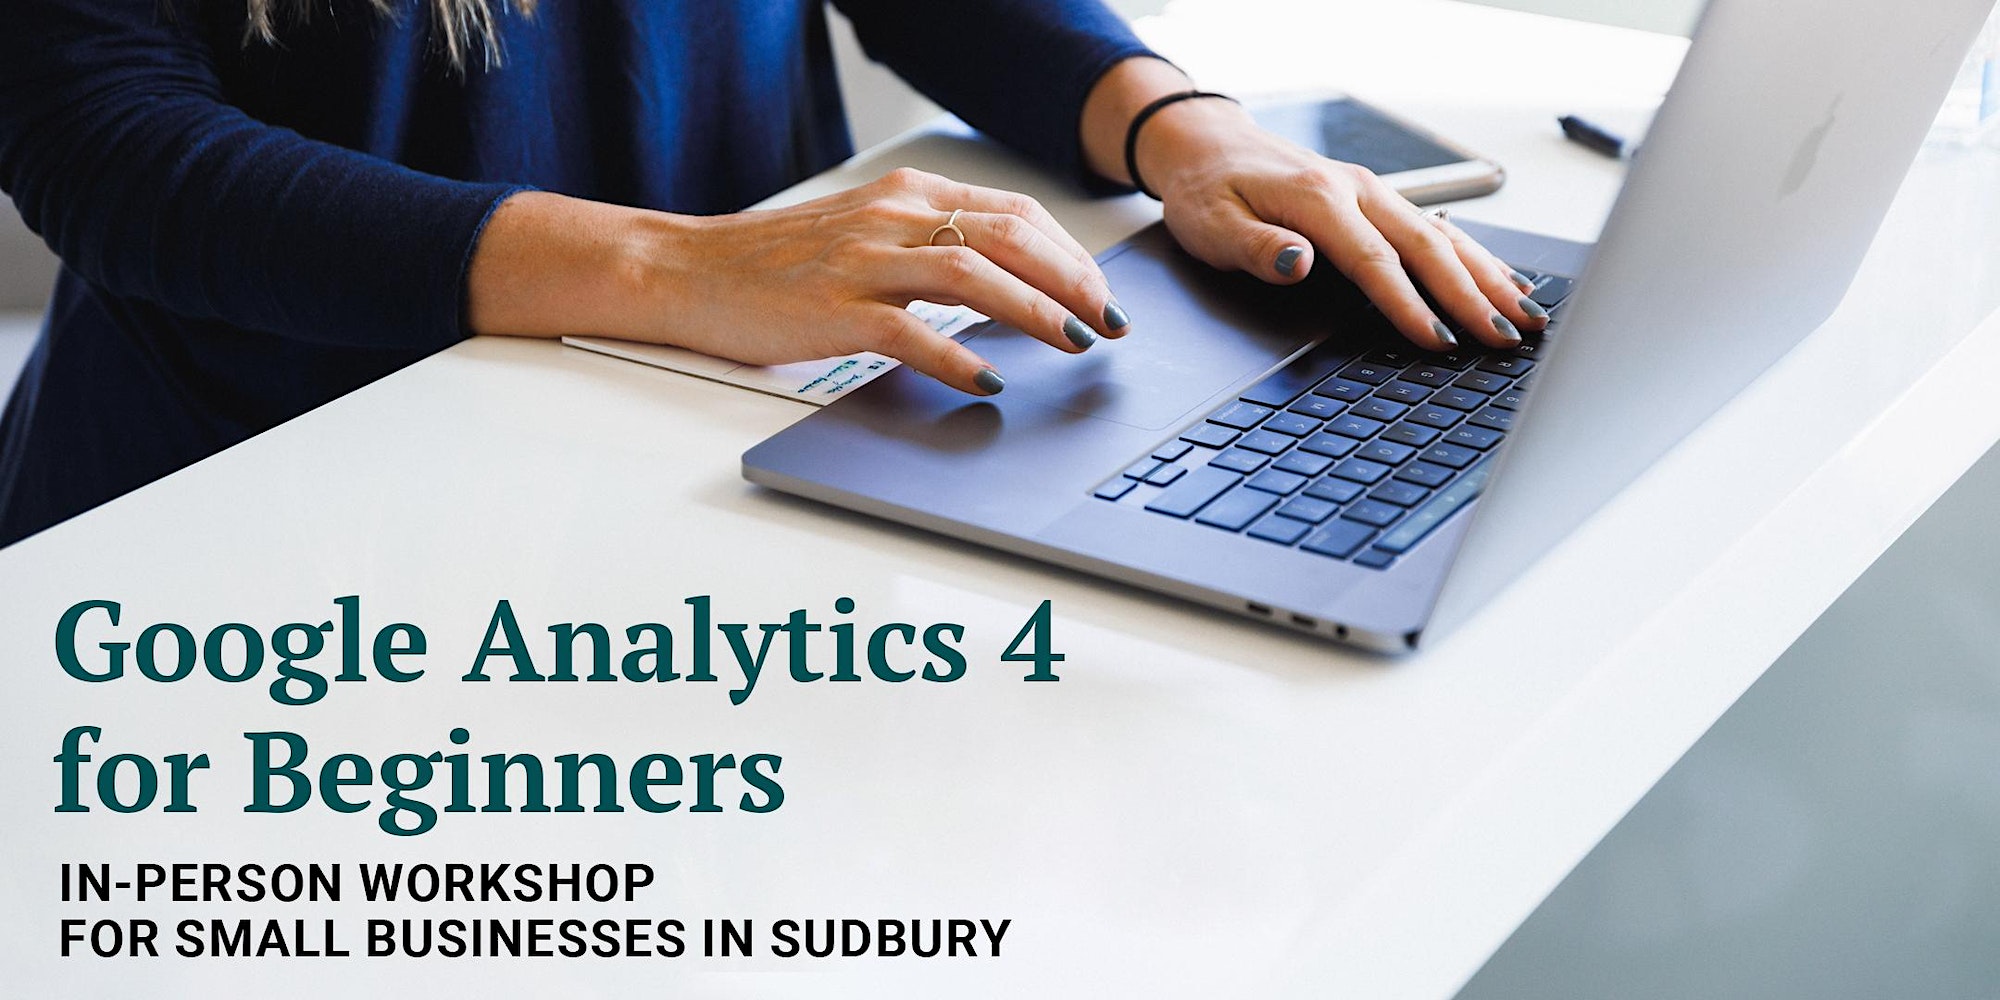 Google analytics 4 for beginners. In-person workshop for small businesses in Sudbury.